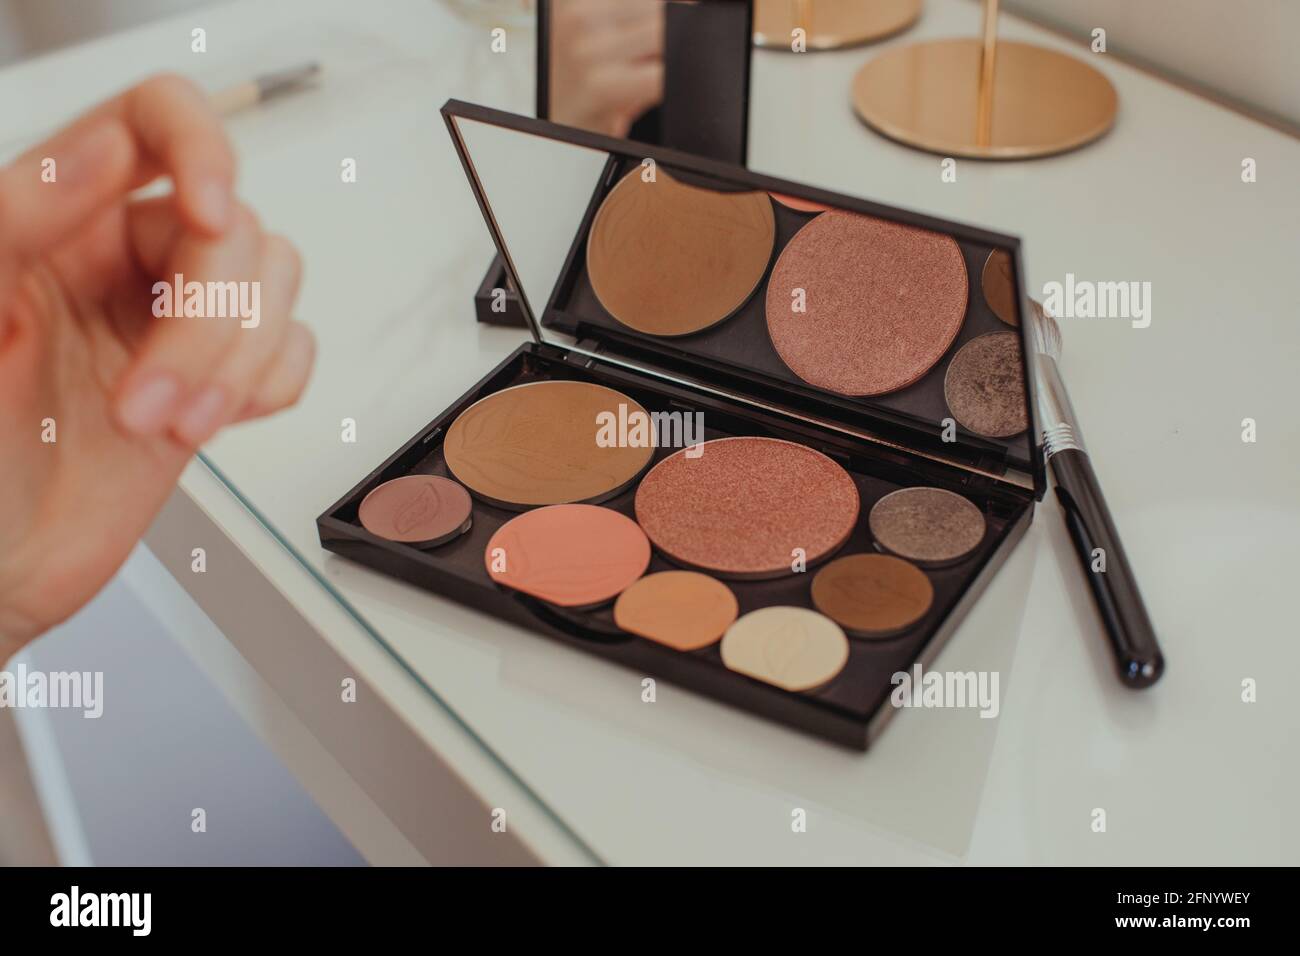 Close-up of a woman's hand reaching for a make-up palette on a dressing table Stock Photo